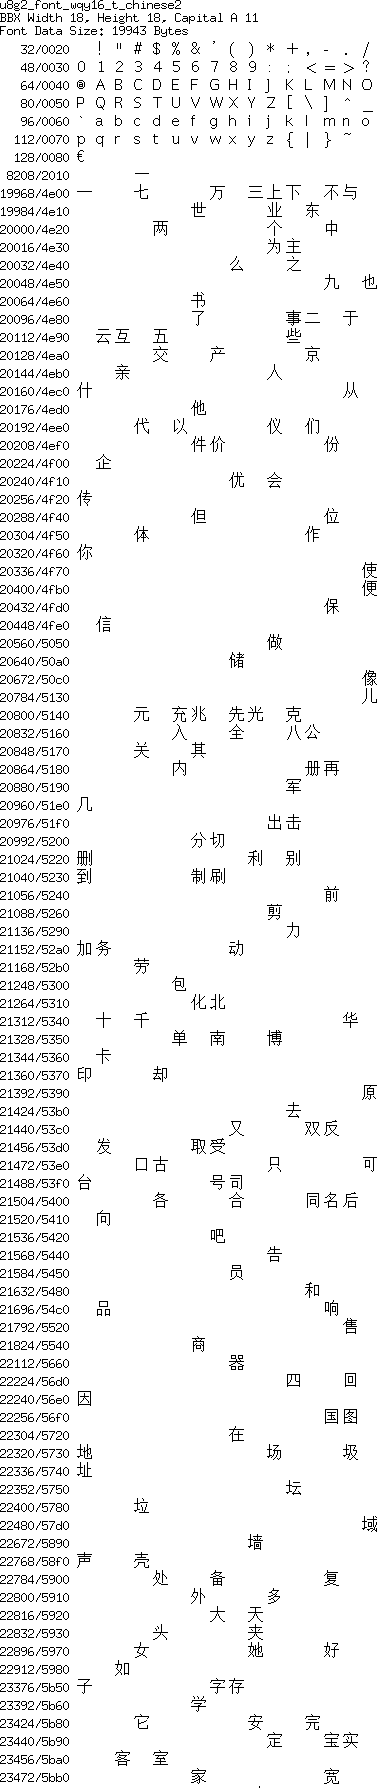 fntpic/u8g2_font_wqy16_t_chinese2.png